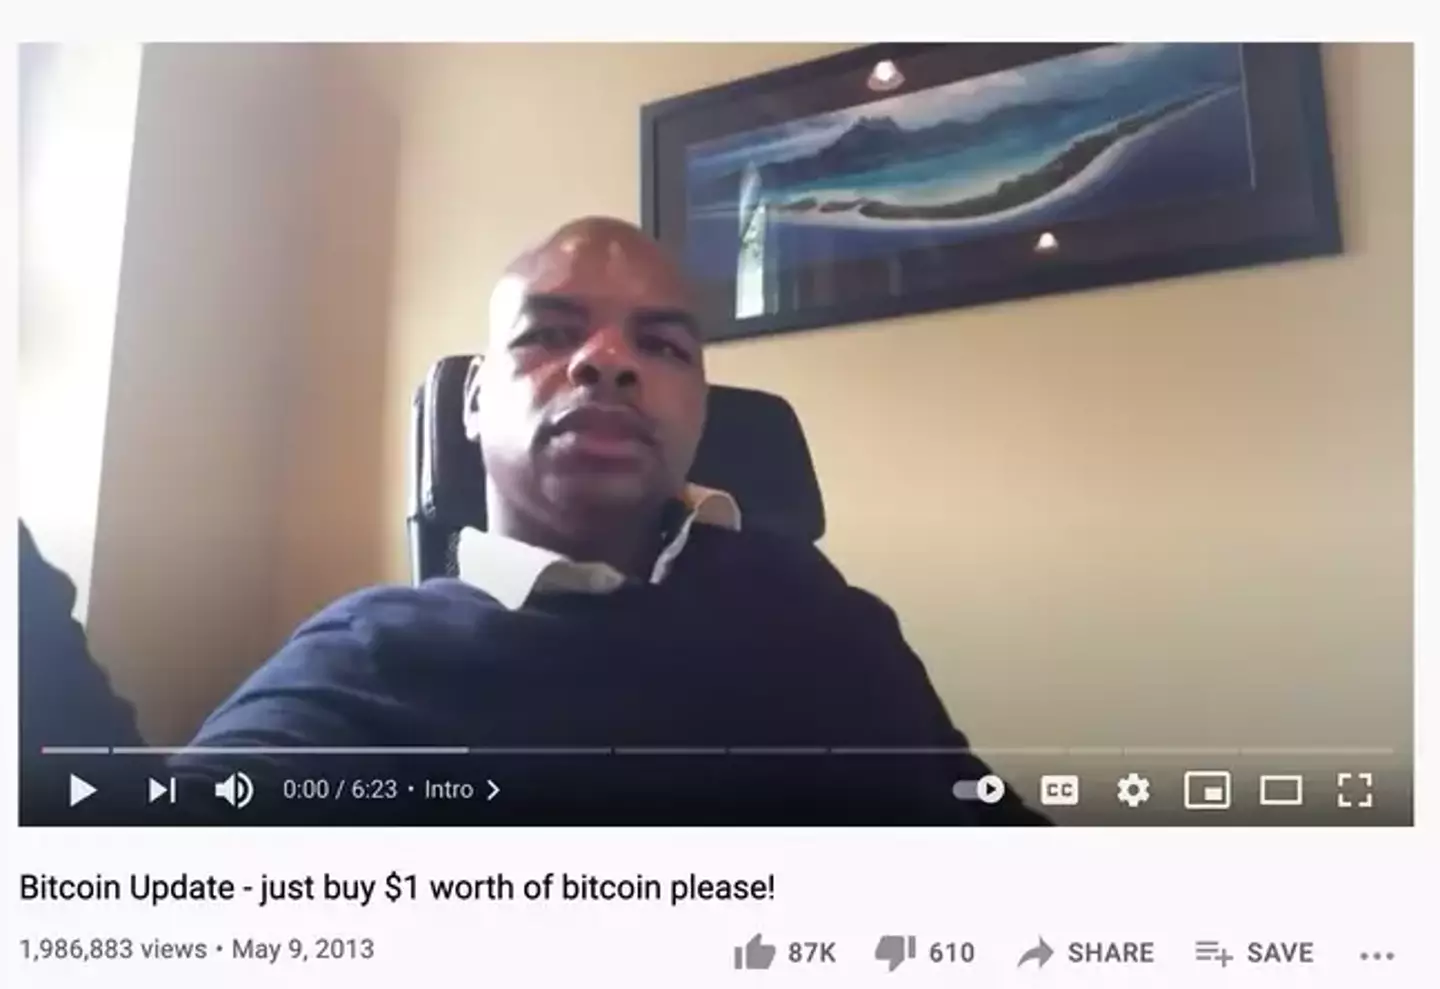 Davinci Jeremie is the man who told everyone to buy just $1 of Bitcoin 10 years ago and pretty much no-one listened.